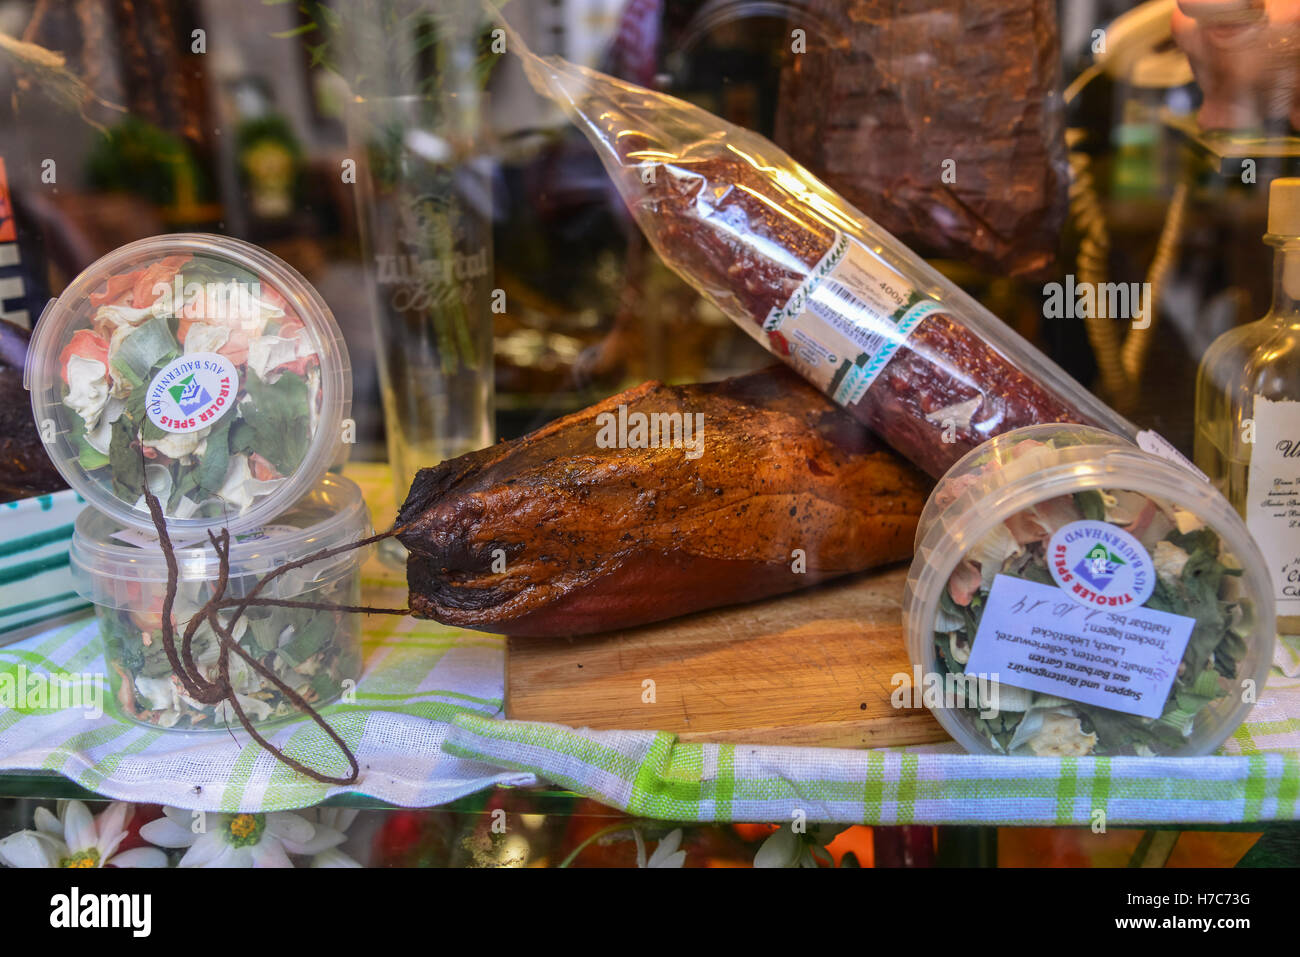 Smoked Meat and Salad, Innsbruck, Austria Stock Photo